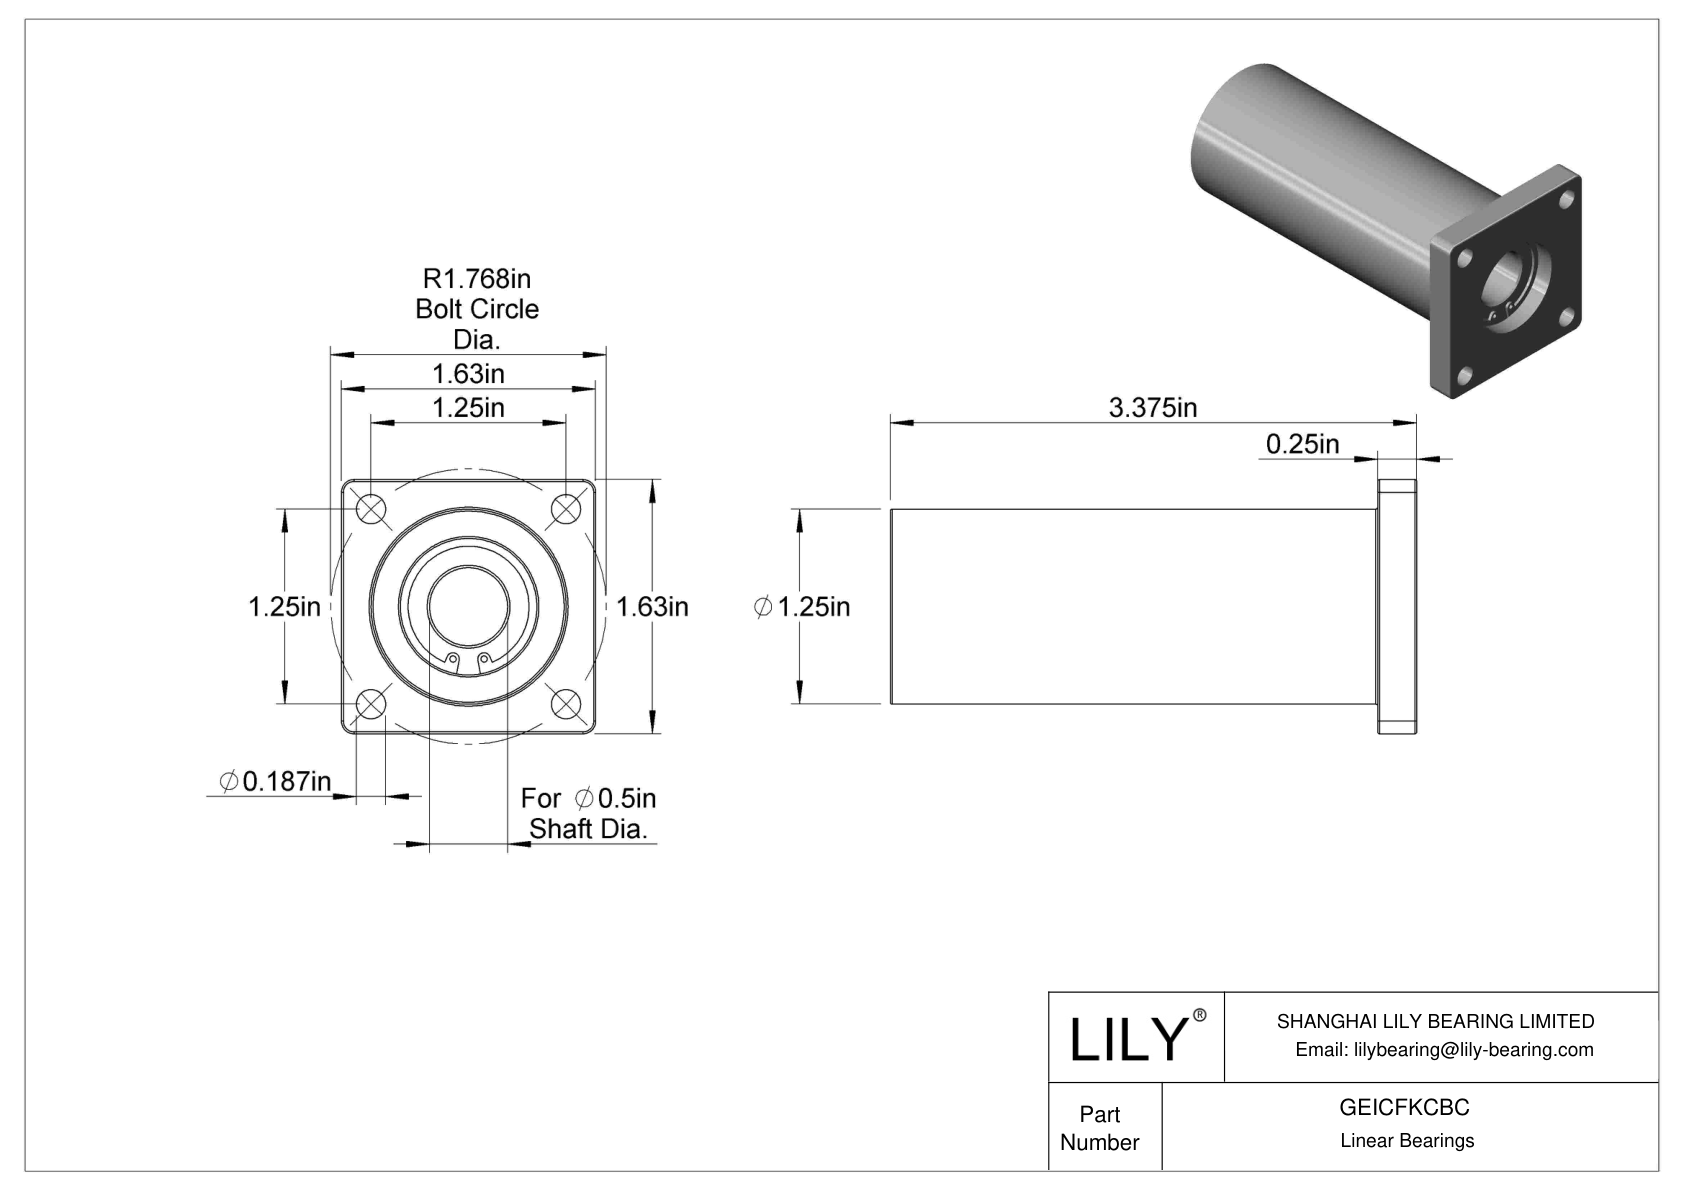 GEICFKCBC Chemical-Resistant Flange-Mounted Linear Sleeve Bearings cad drawing